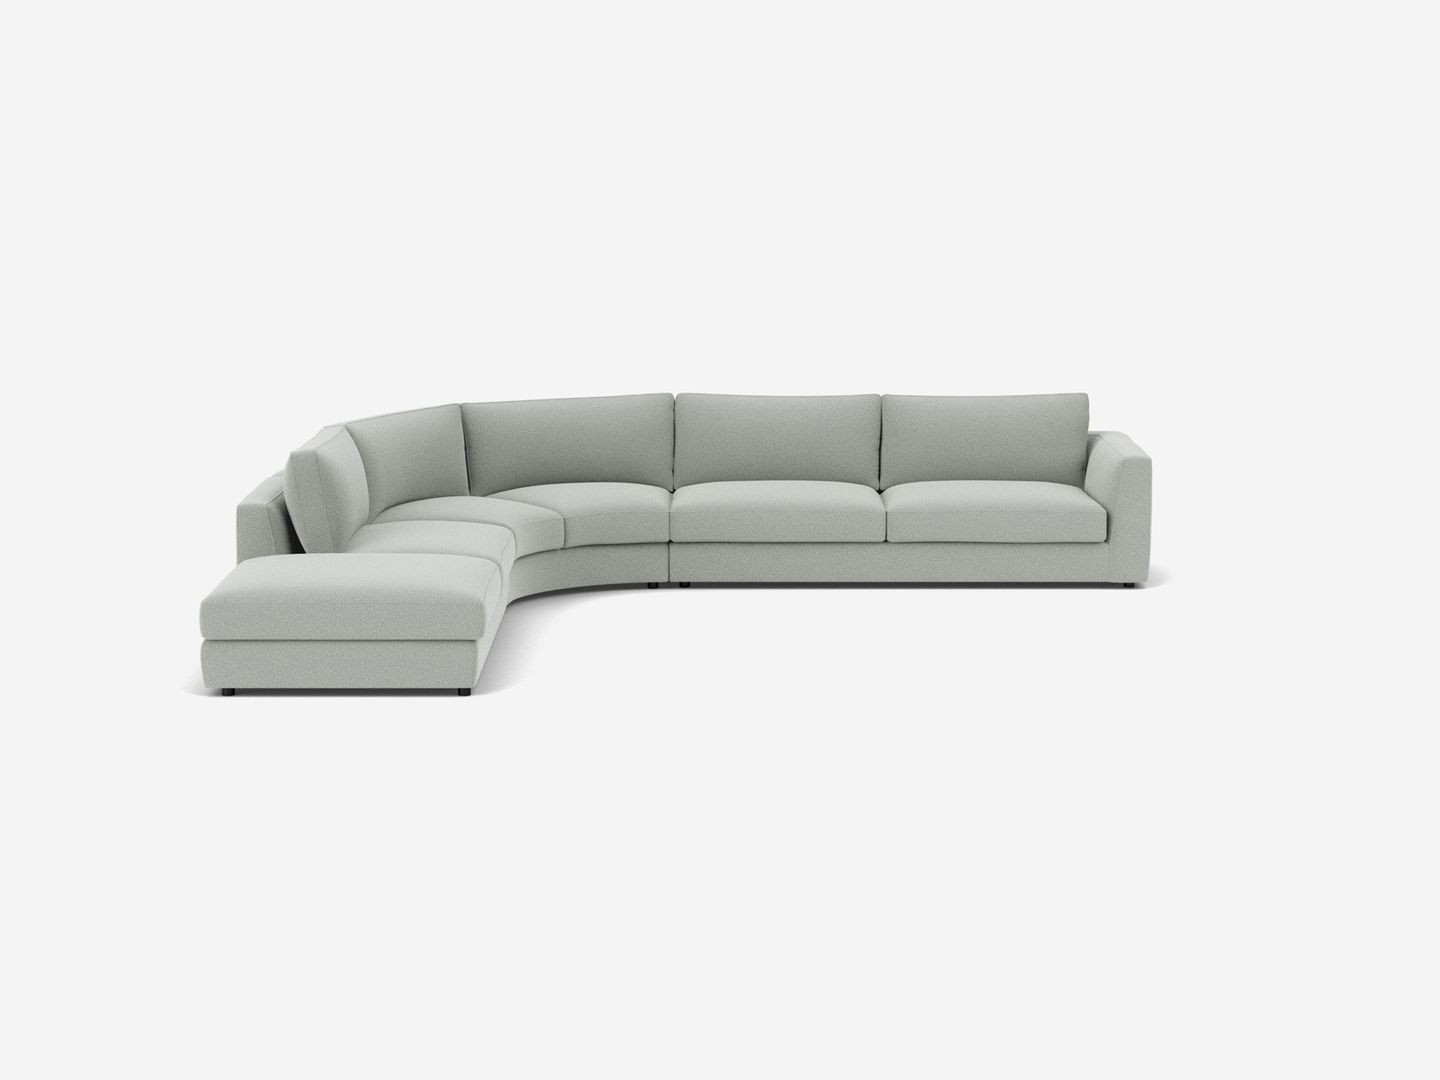 Day furniture – 3 piece sectional sofa